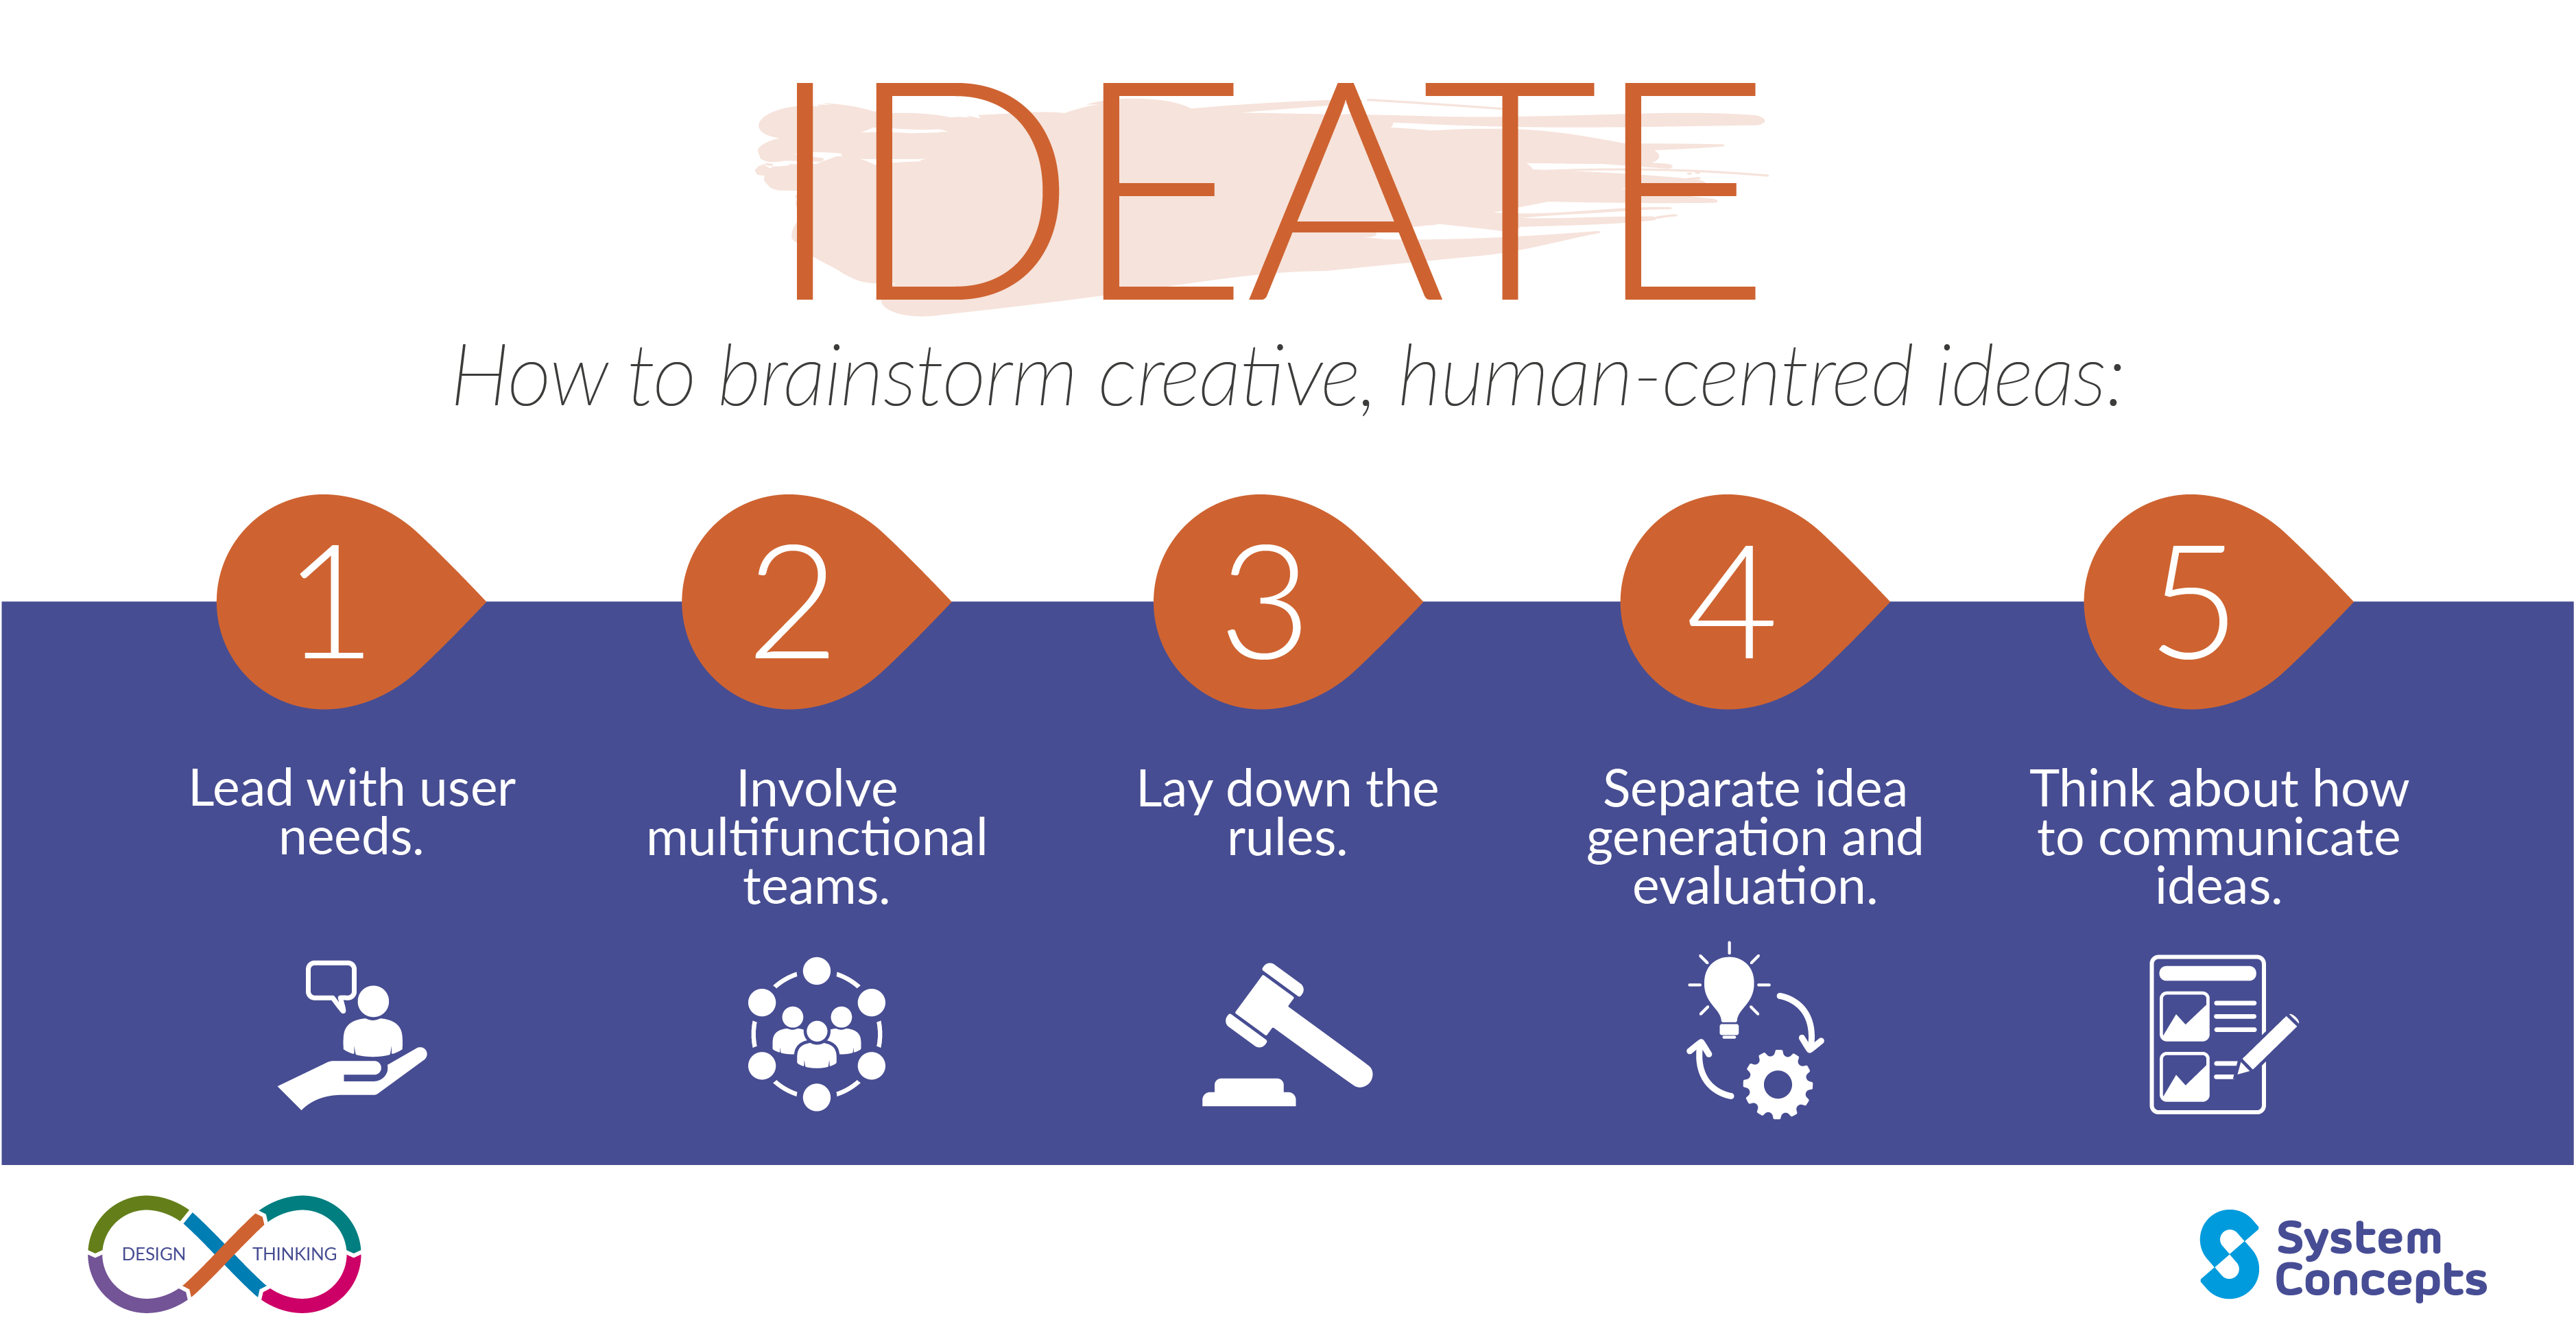 Ideation in Design Thinking: Importance of Approach